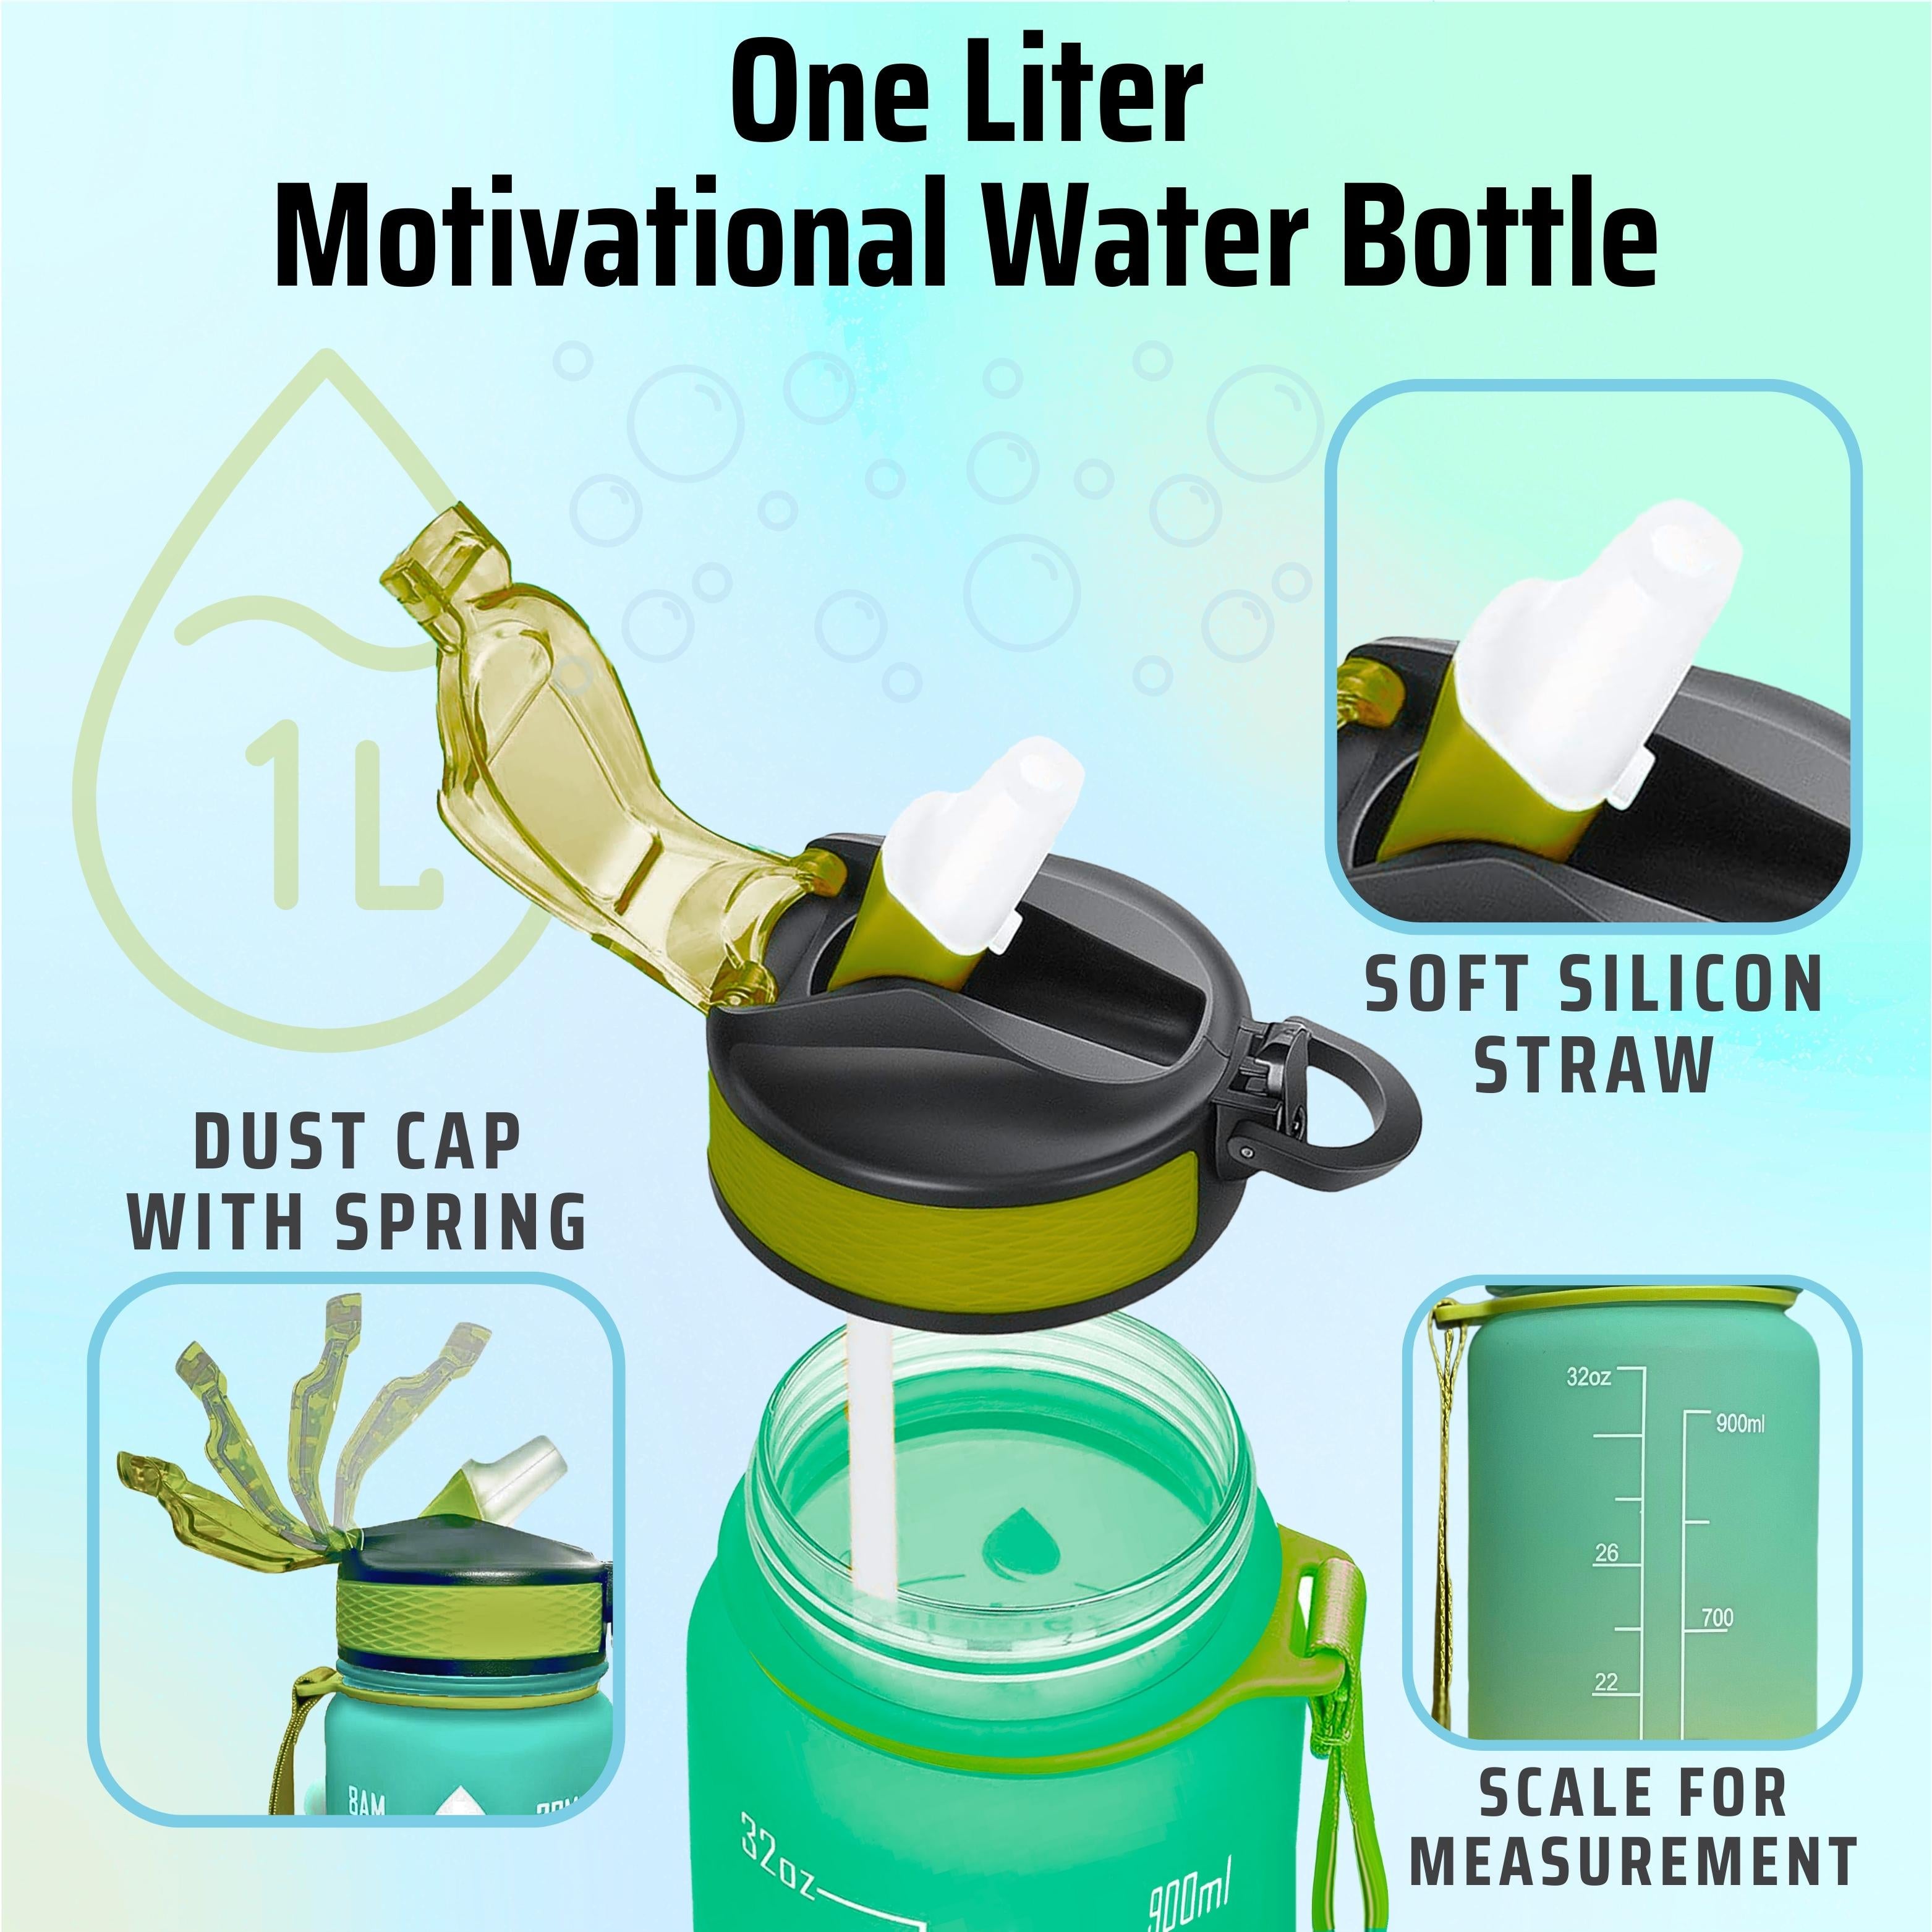 Repton 1L Sports Water Bottle with Motivational Time Marker - Stay Hydrated in Style! Repton Fitness and Boxing Gears